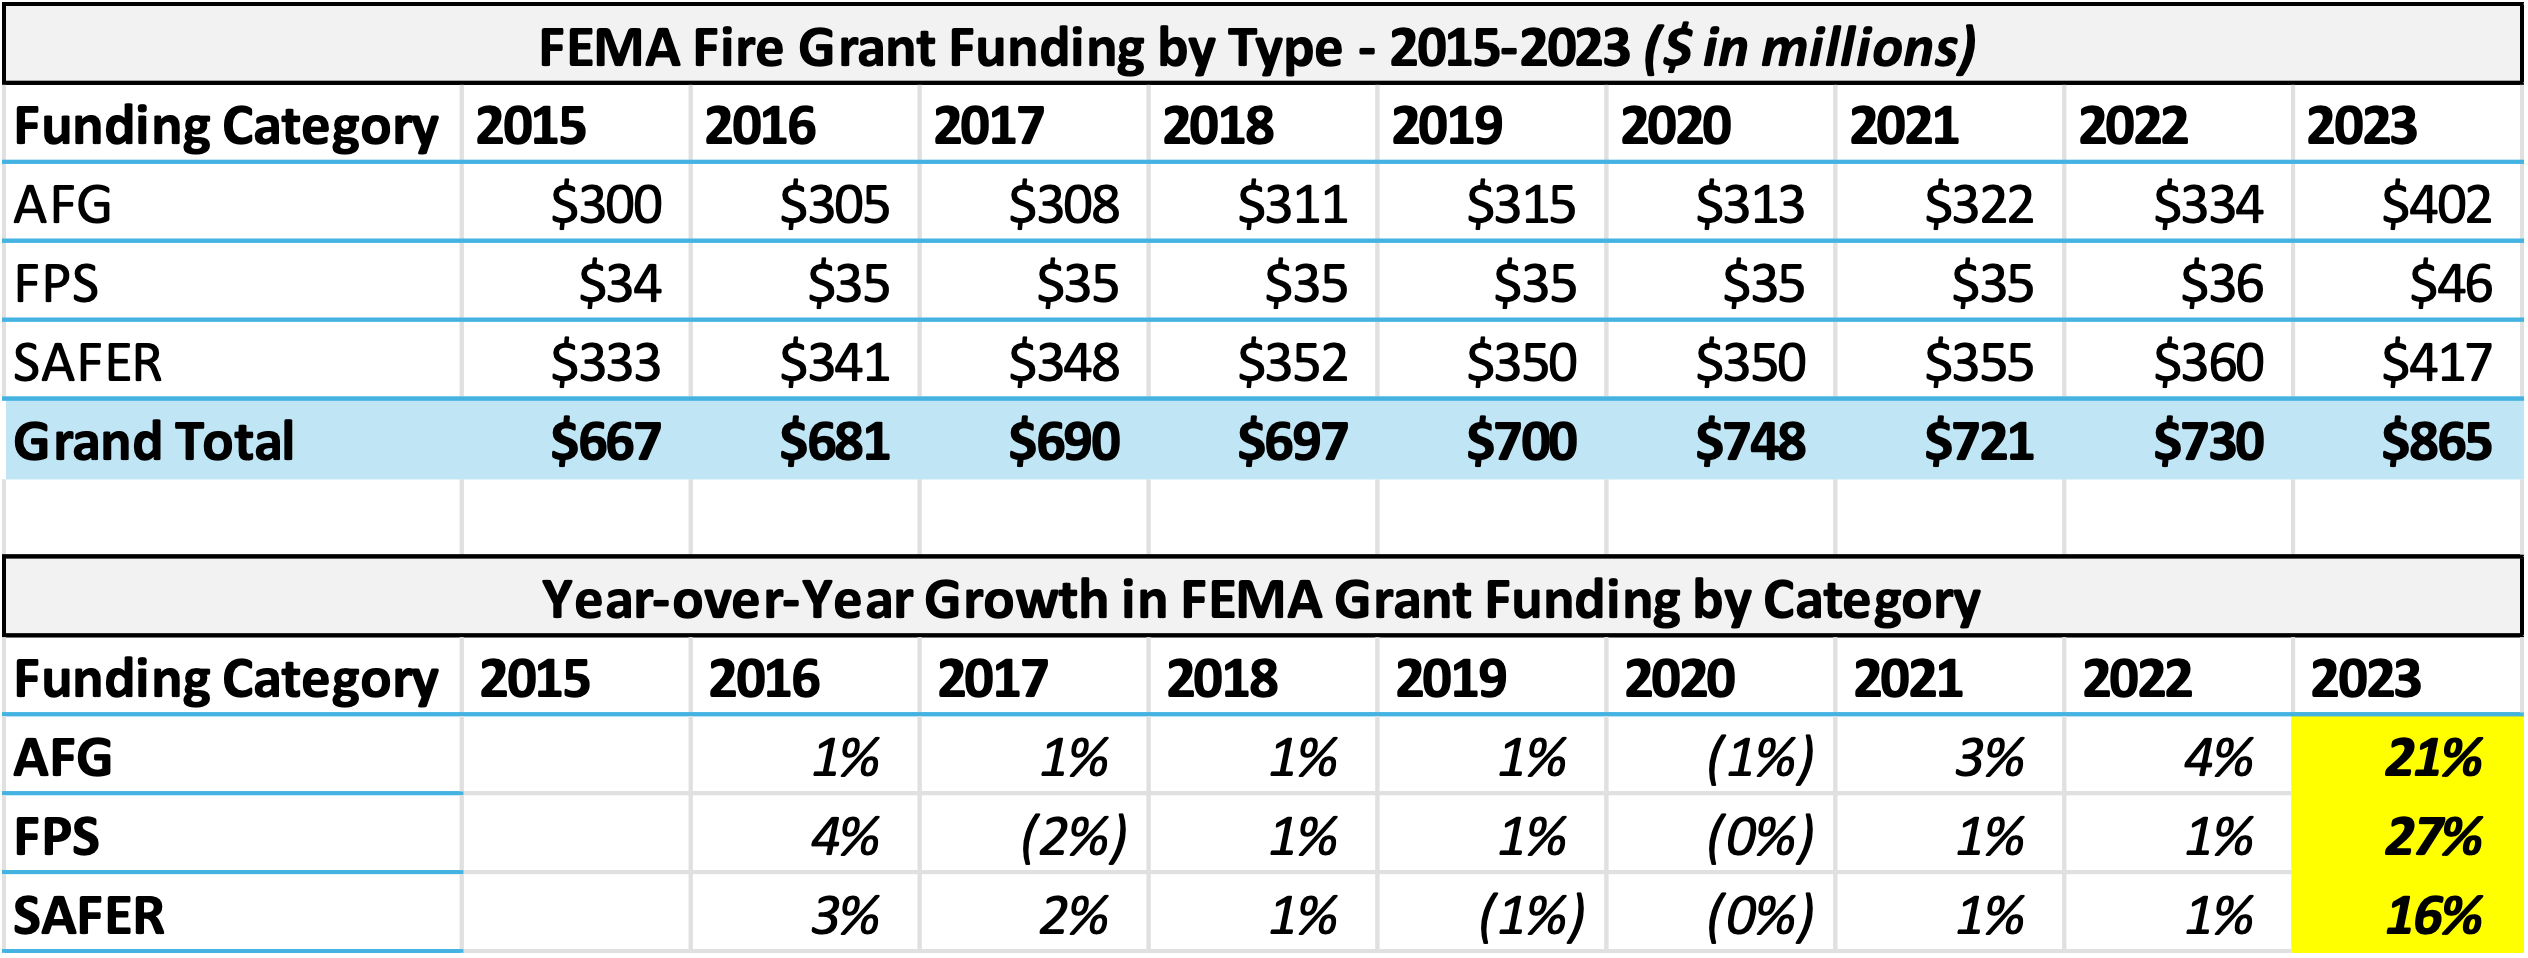 FEMA Fire Grant Funding by Type and Year-over-Year Growth